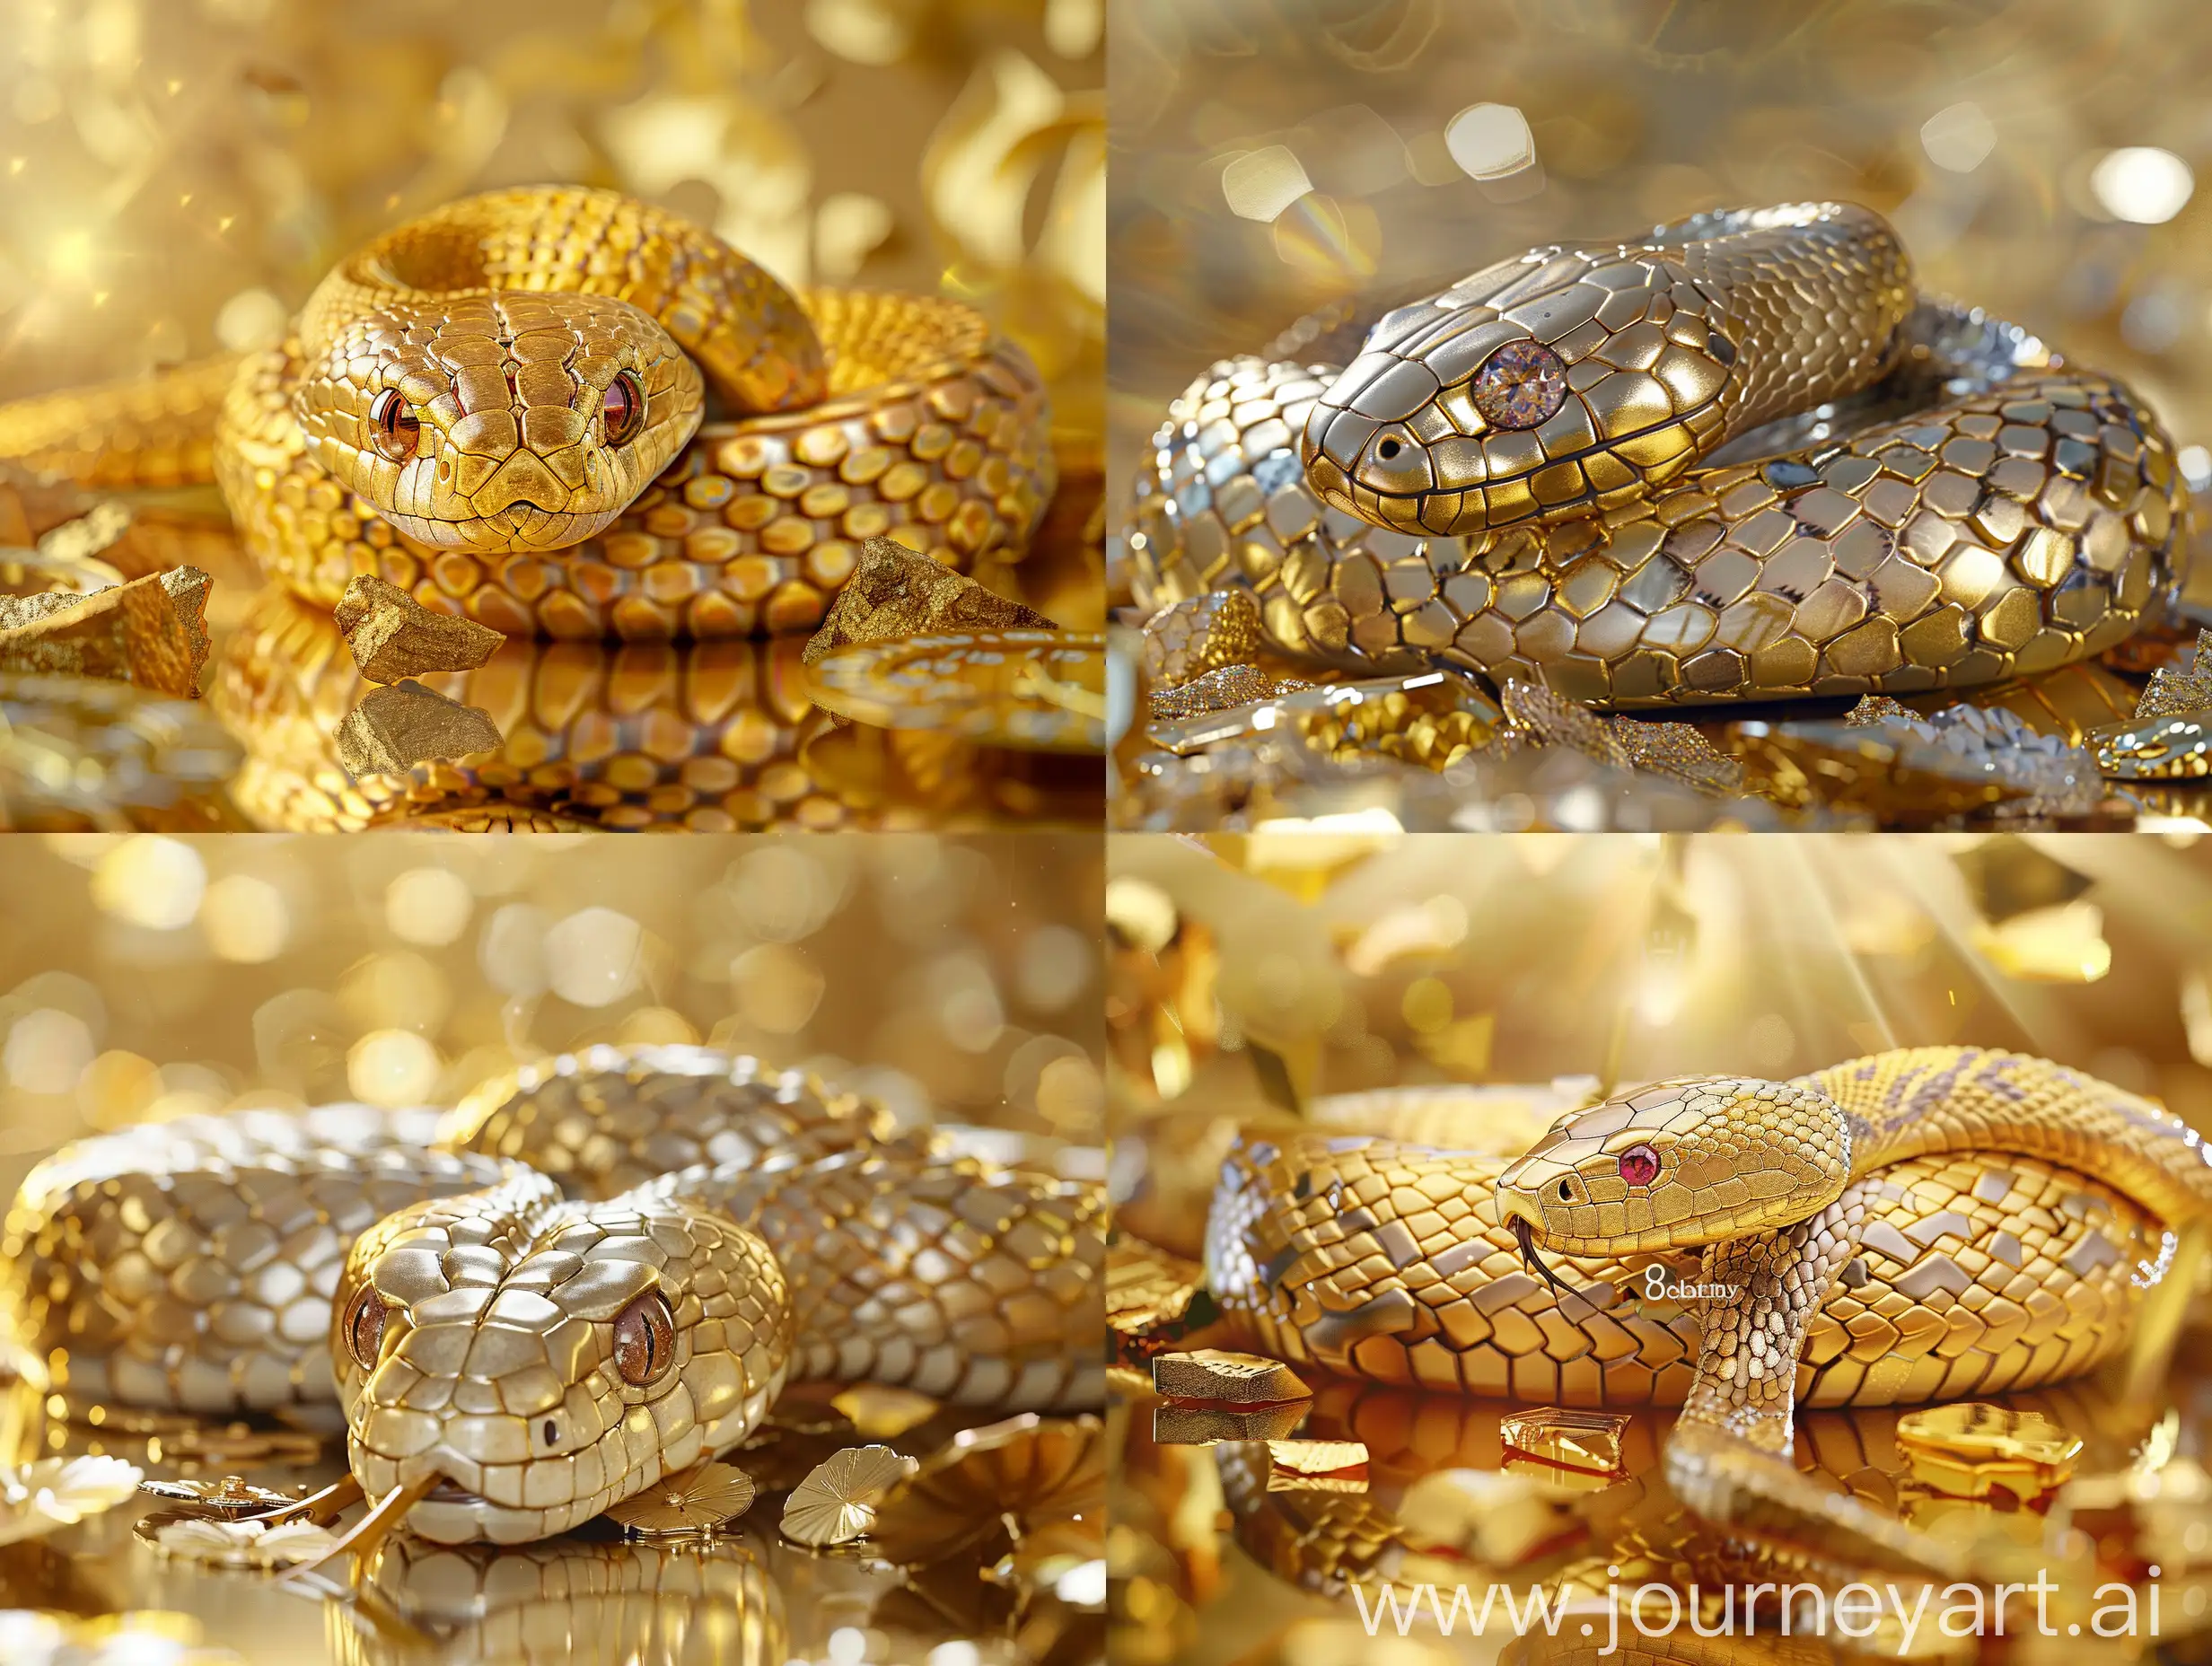 Golden-Snake-with-Ruby-Eyes-Coiling-Around-Wall-Clocks